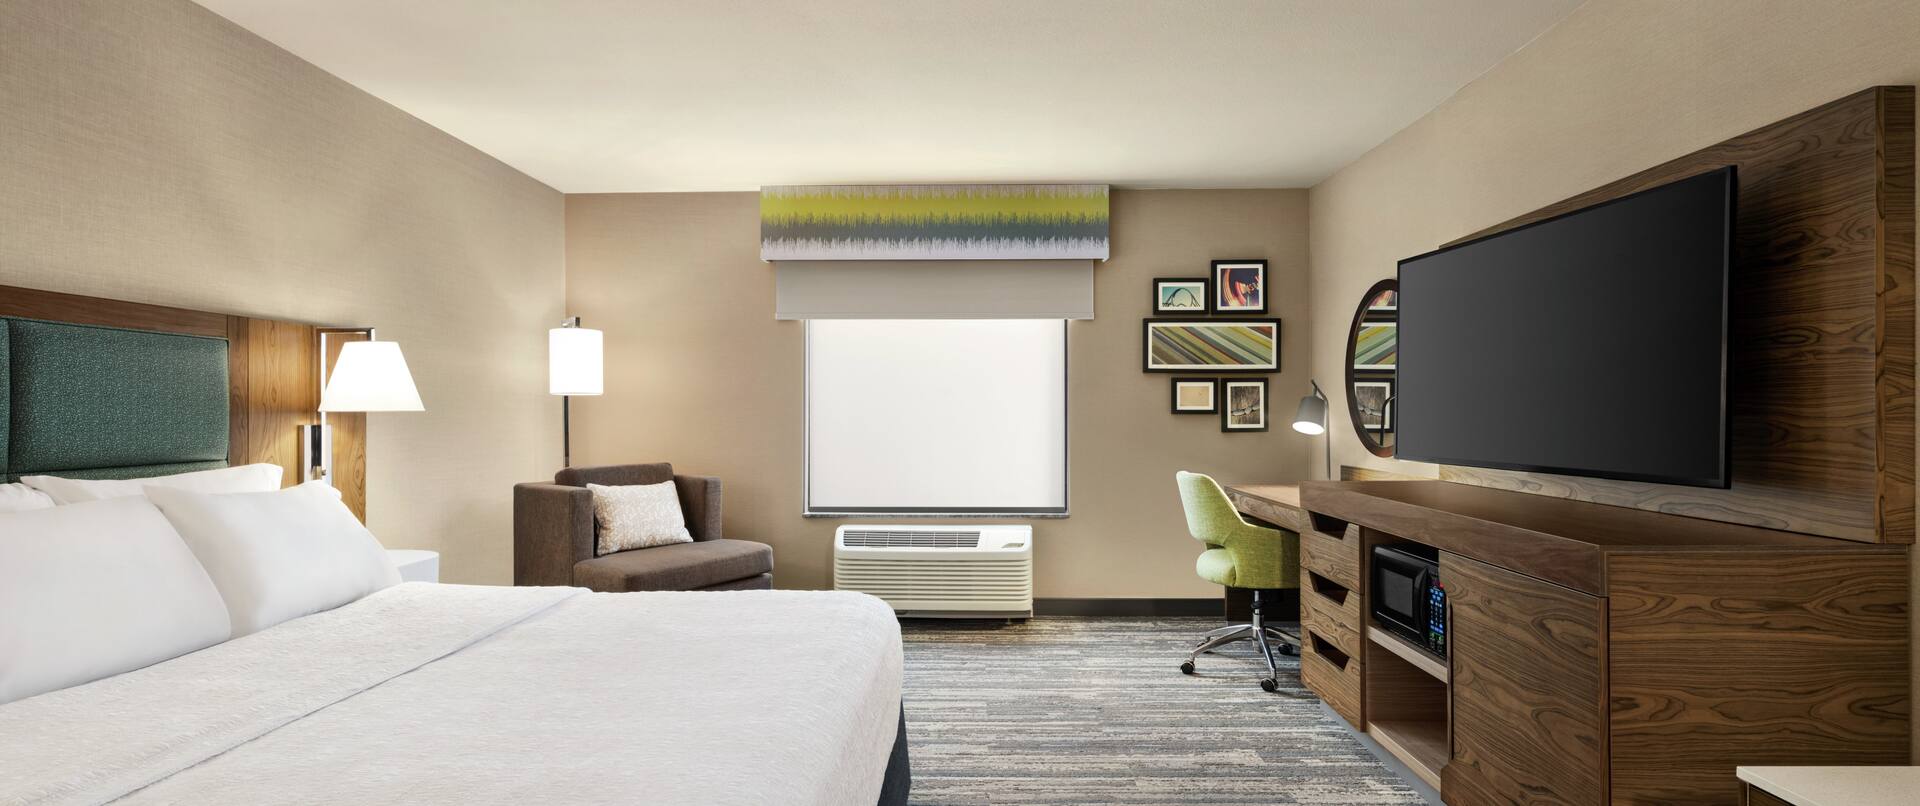 Spacious accessible guest room featuring comfortable king bed, TV, and work desk.